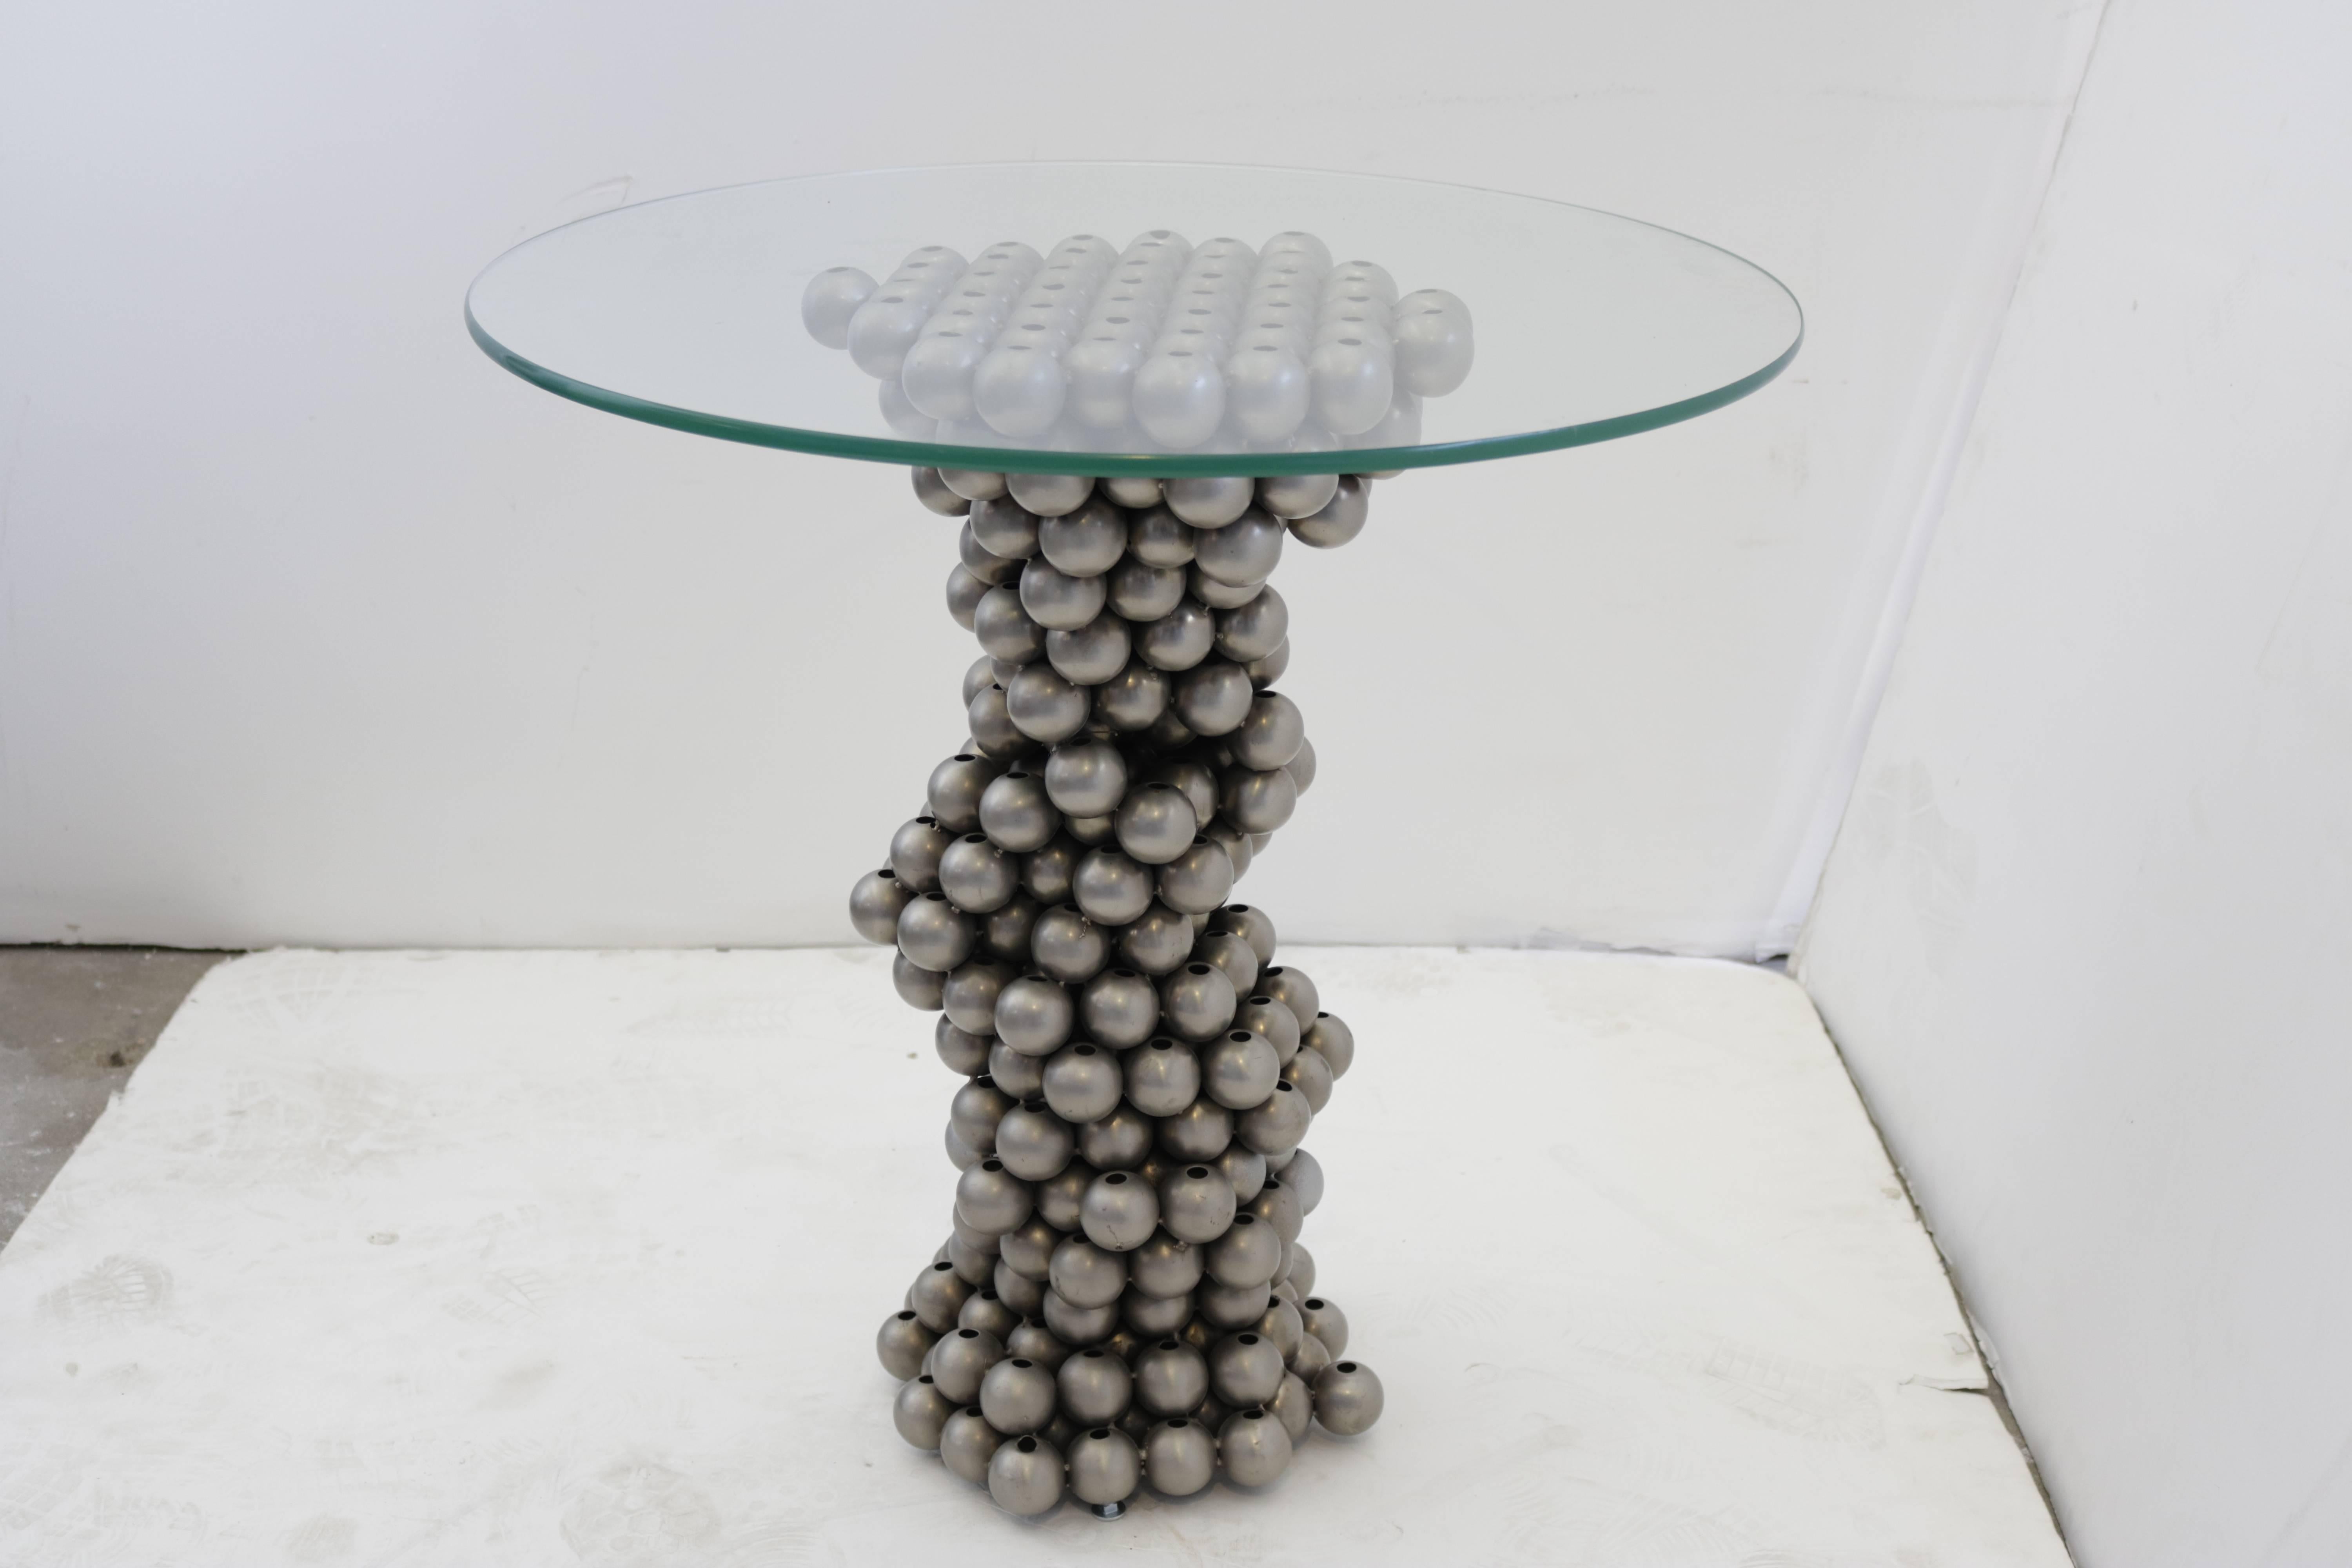 Unusual 1970s gueridon has a base made of chrome steel balls which resembles a spiral or helix. Glass top measures 24